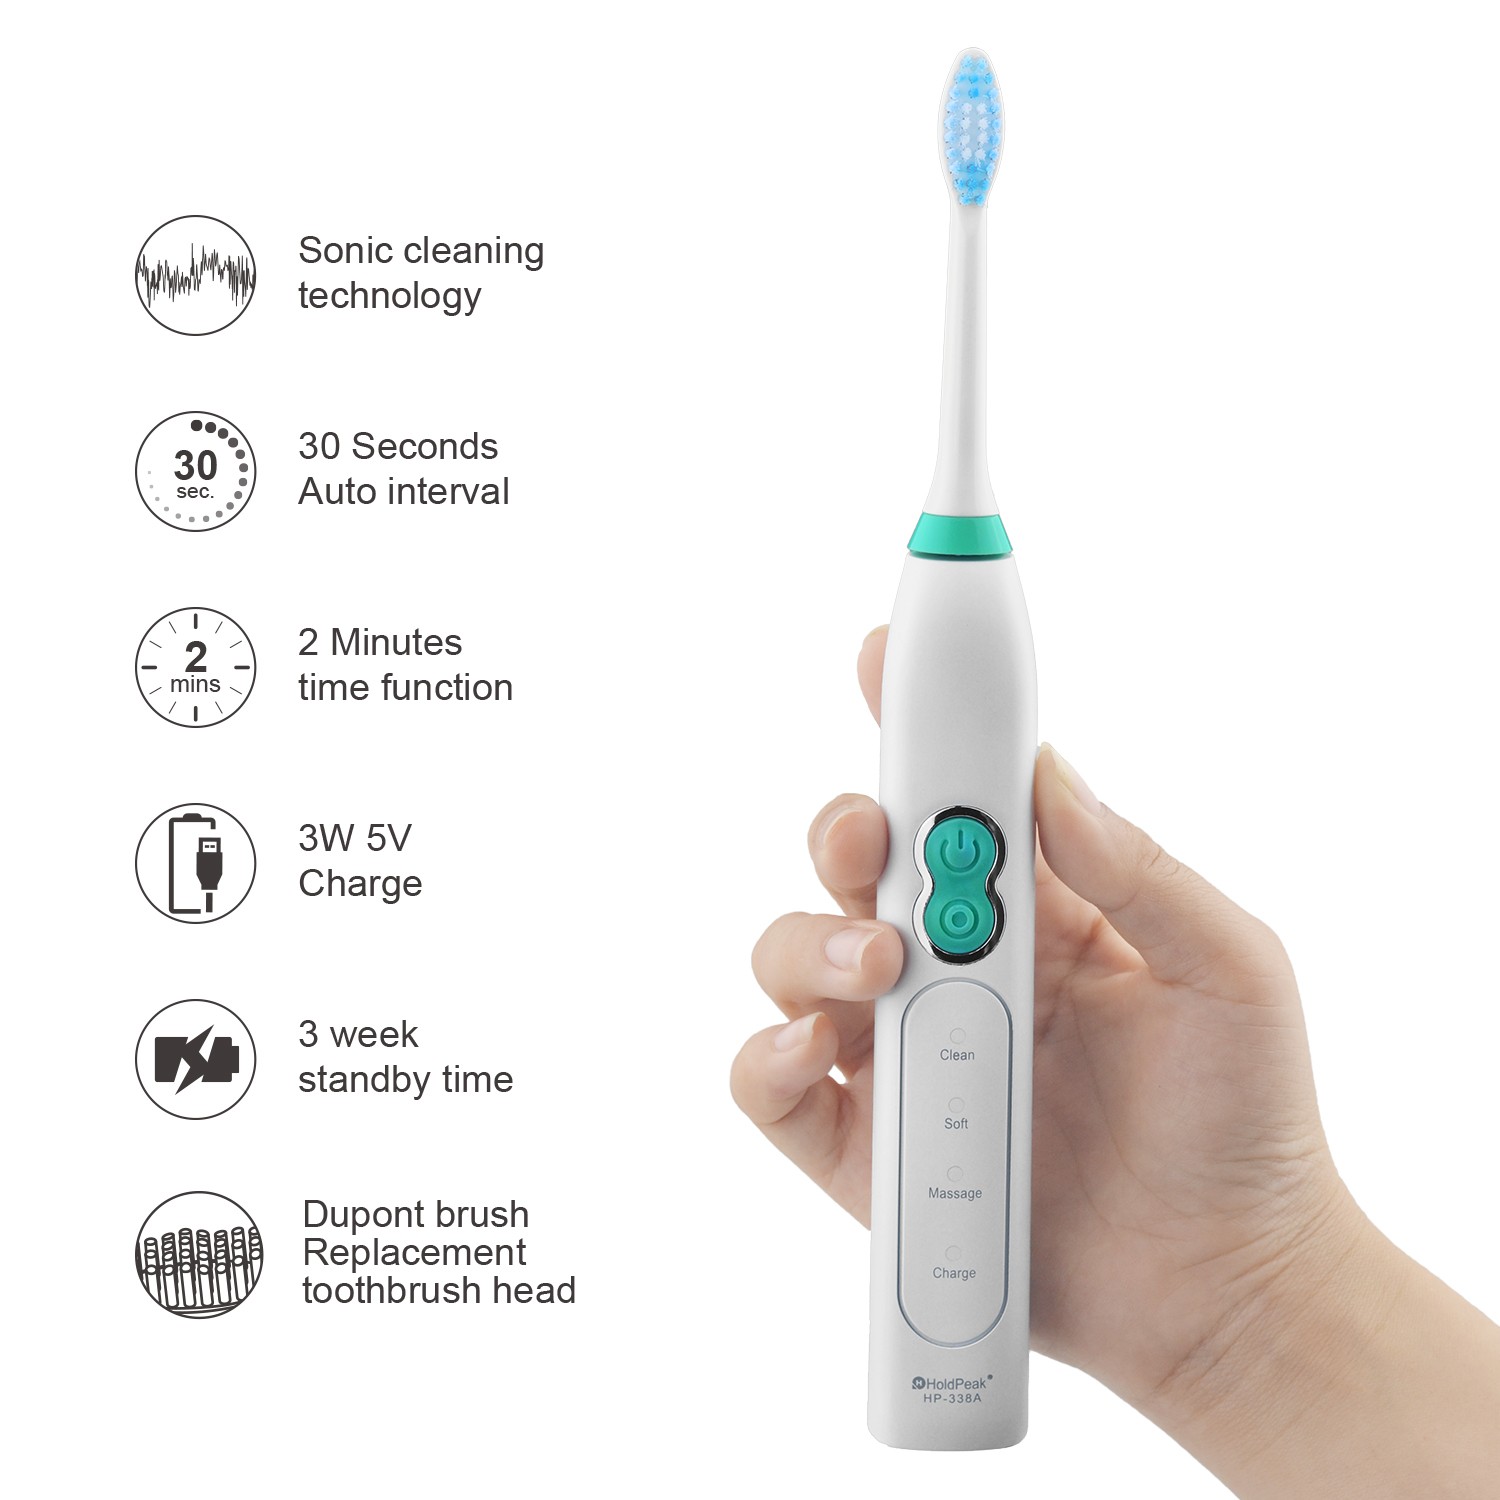 HoldPeak powerful original sonicare toothbrush for business for woman